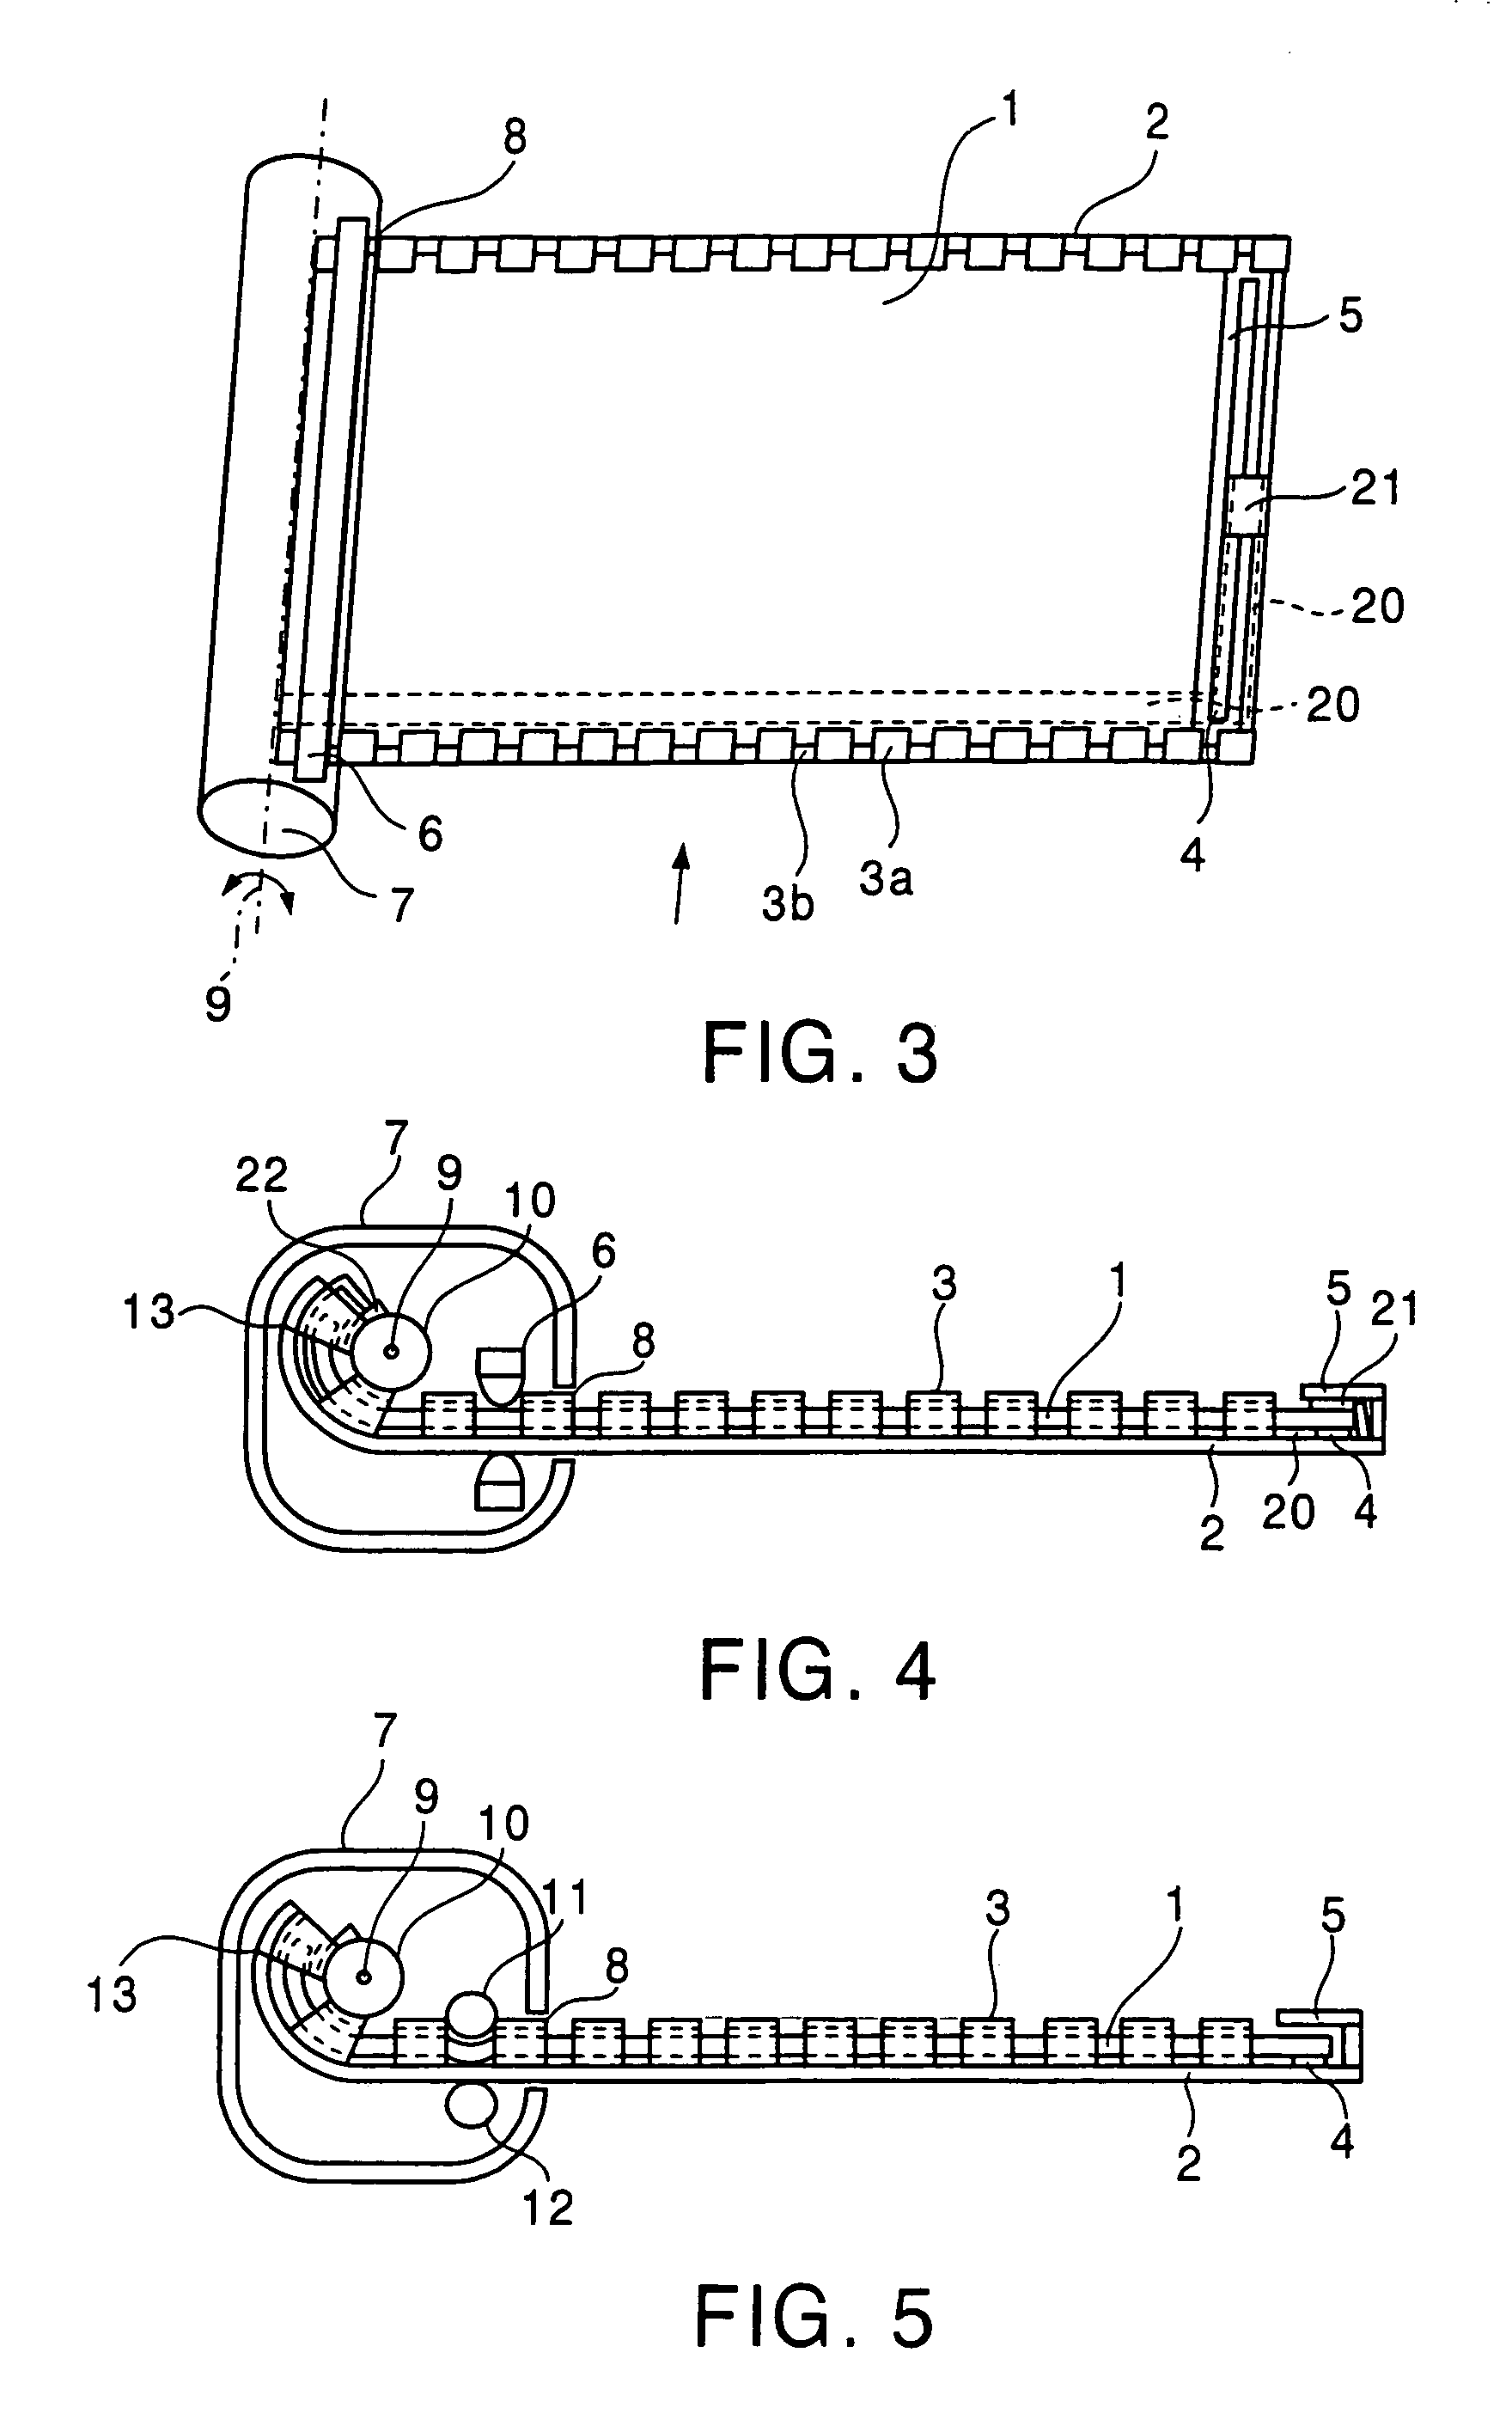 Display device having flexibility with a contact member allowing the first and second plates to be slid in the second direction